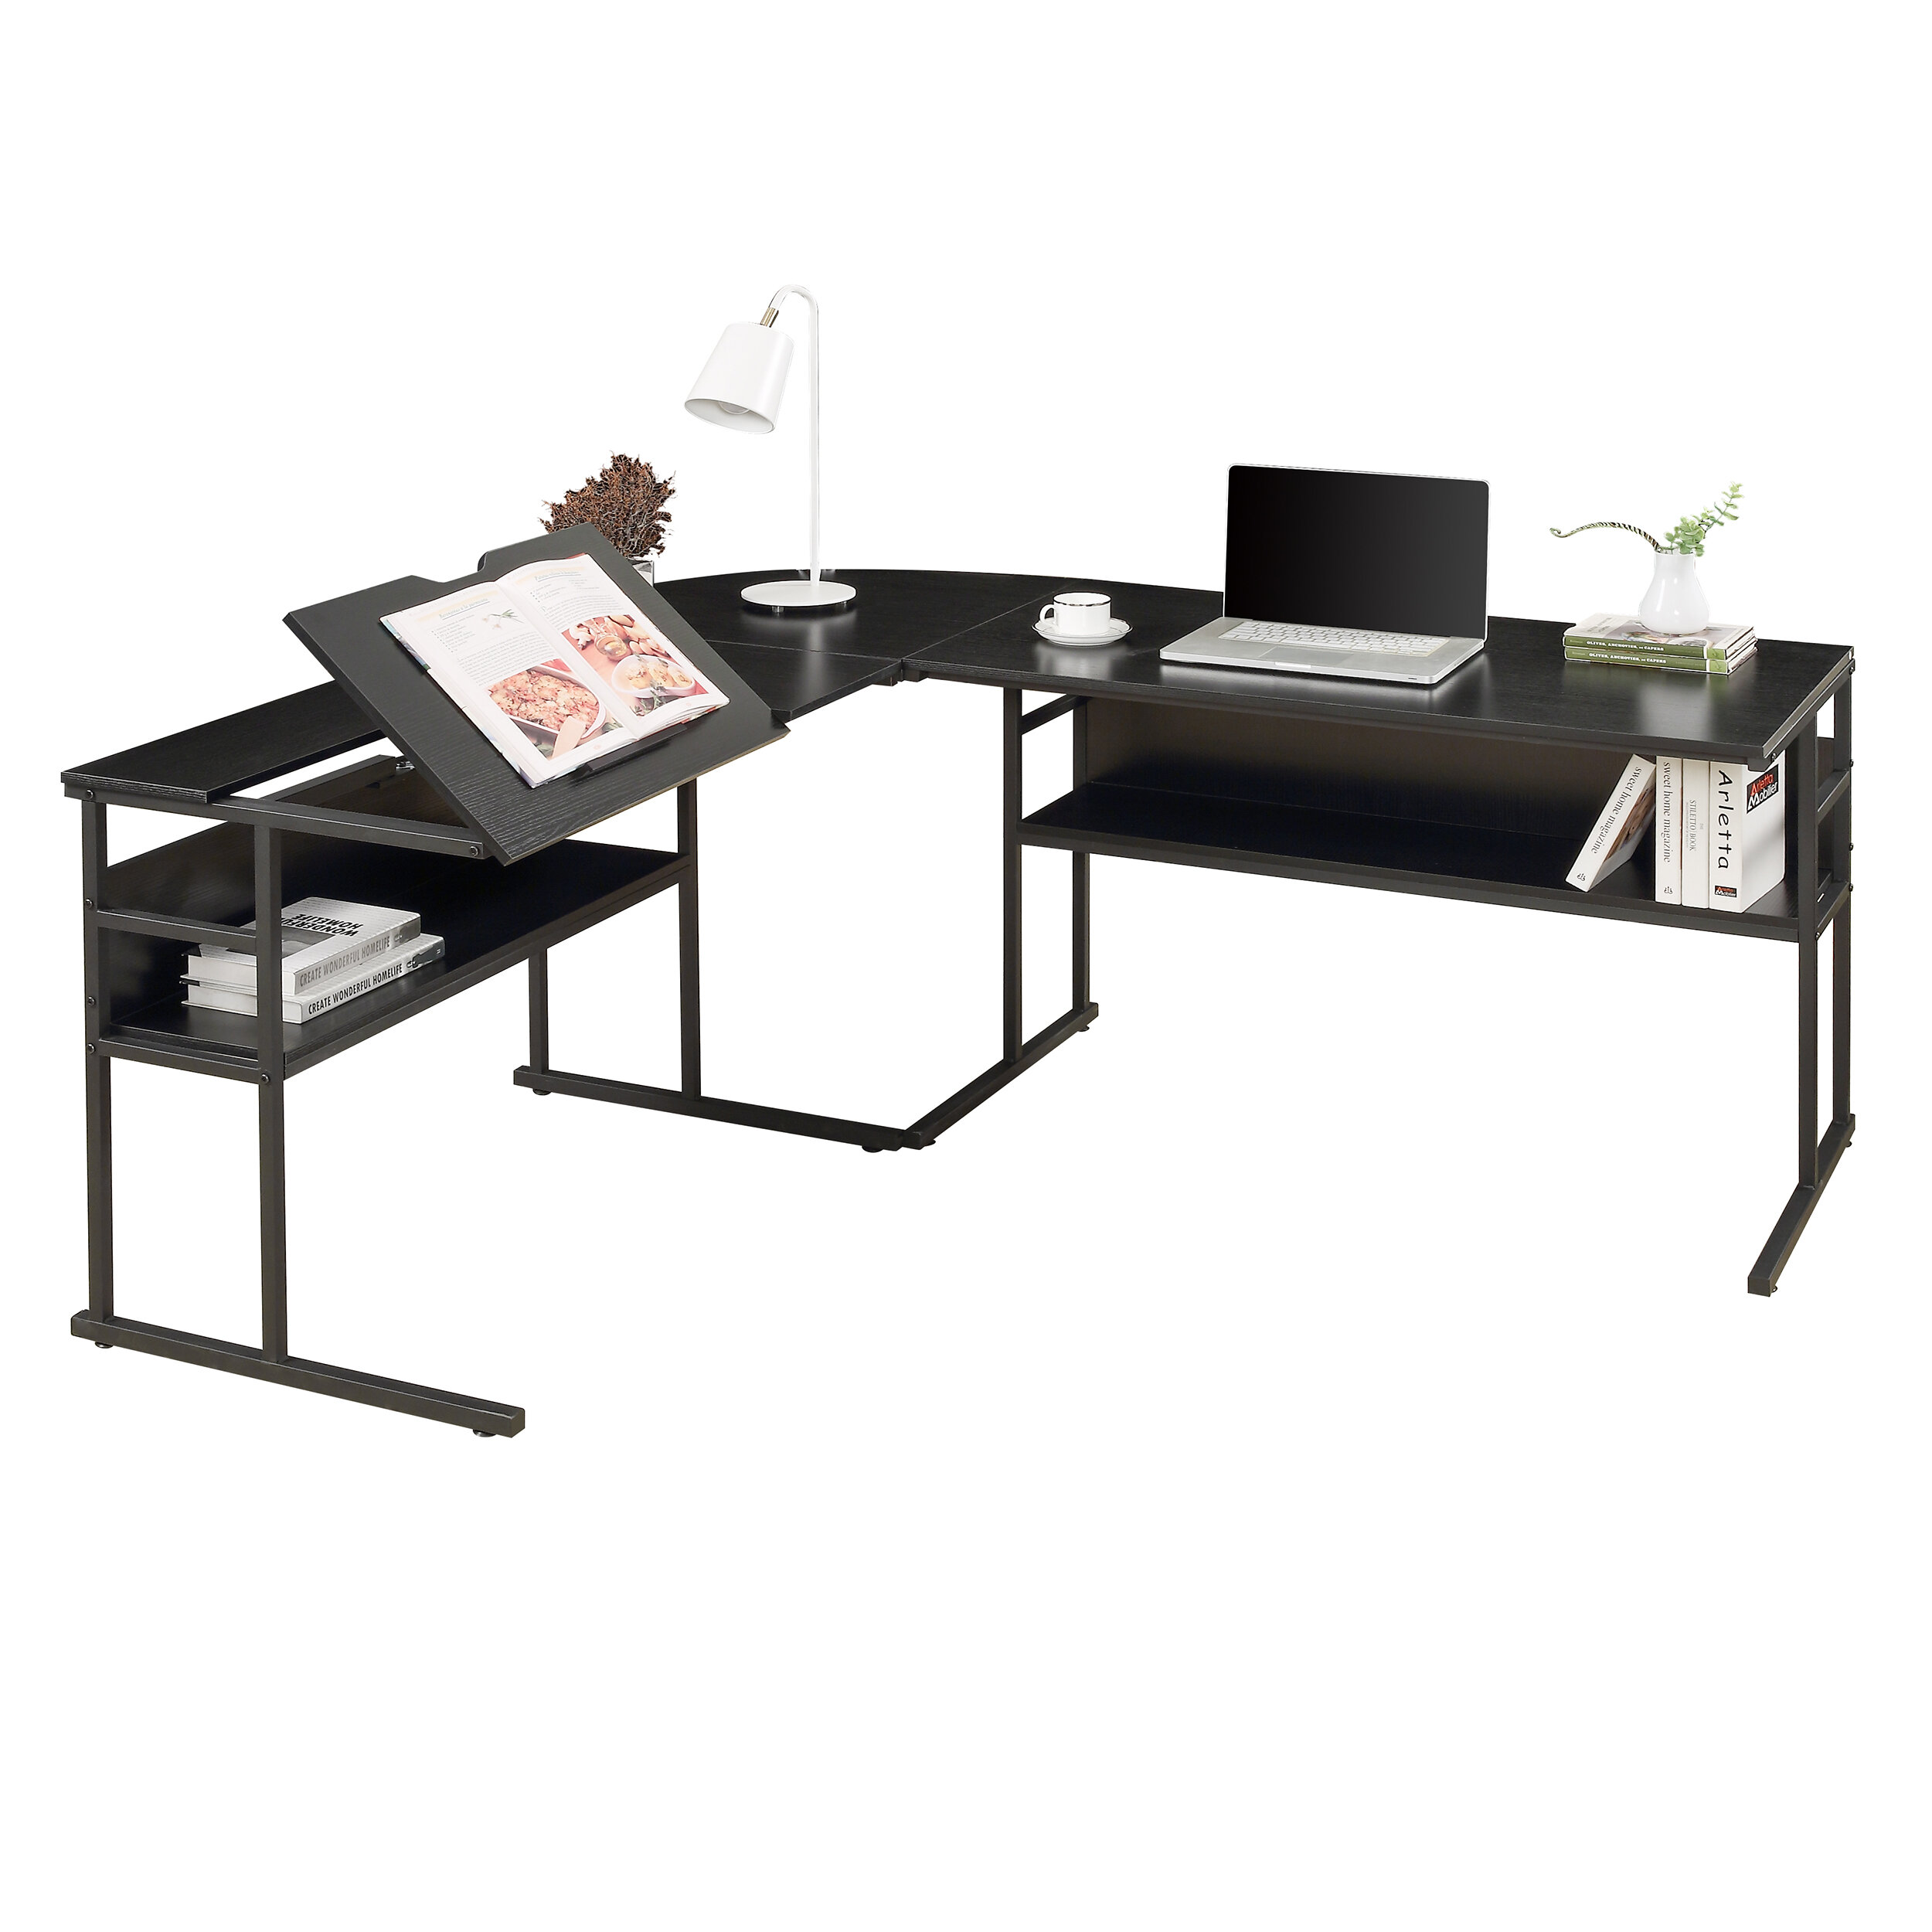 Details about   Modern Simple Design Home Office Desk Computer Table Desktop Study Writing White 